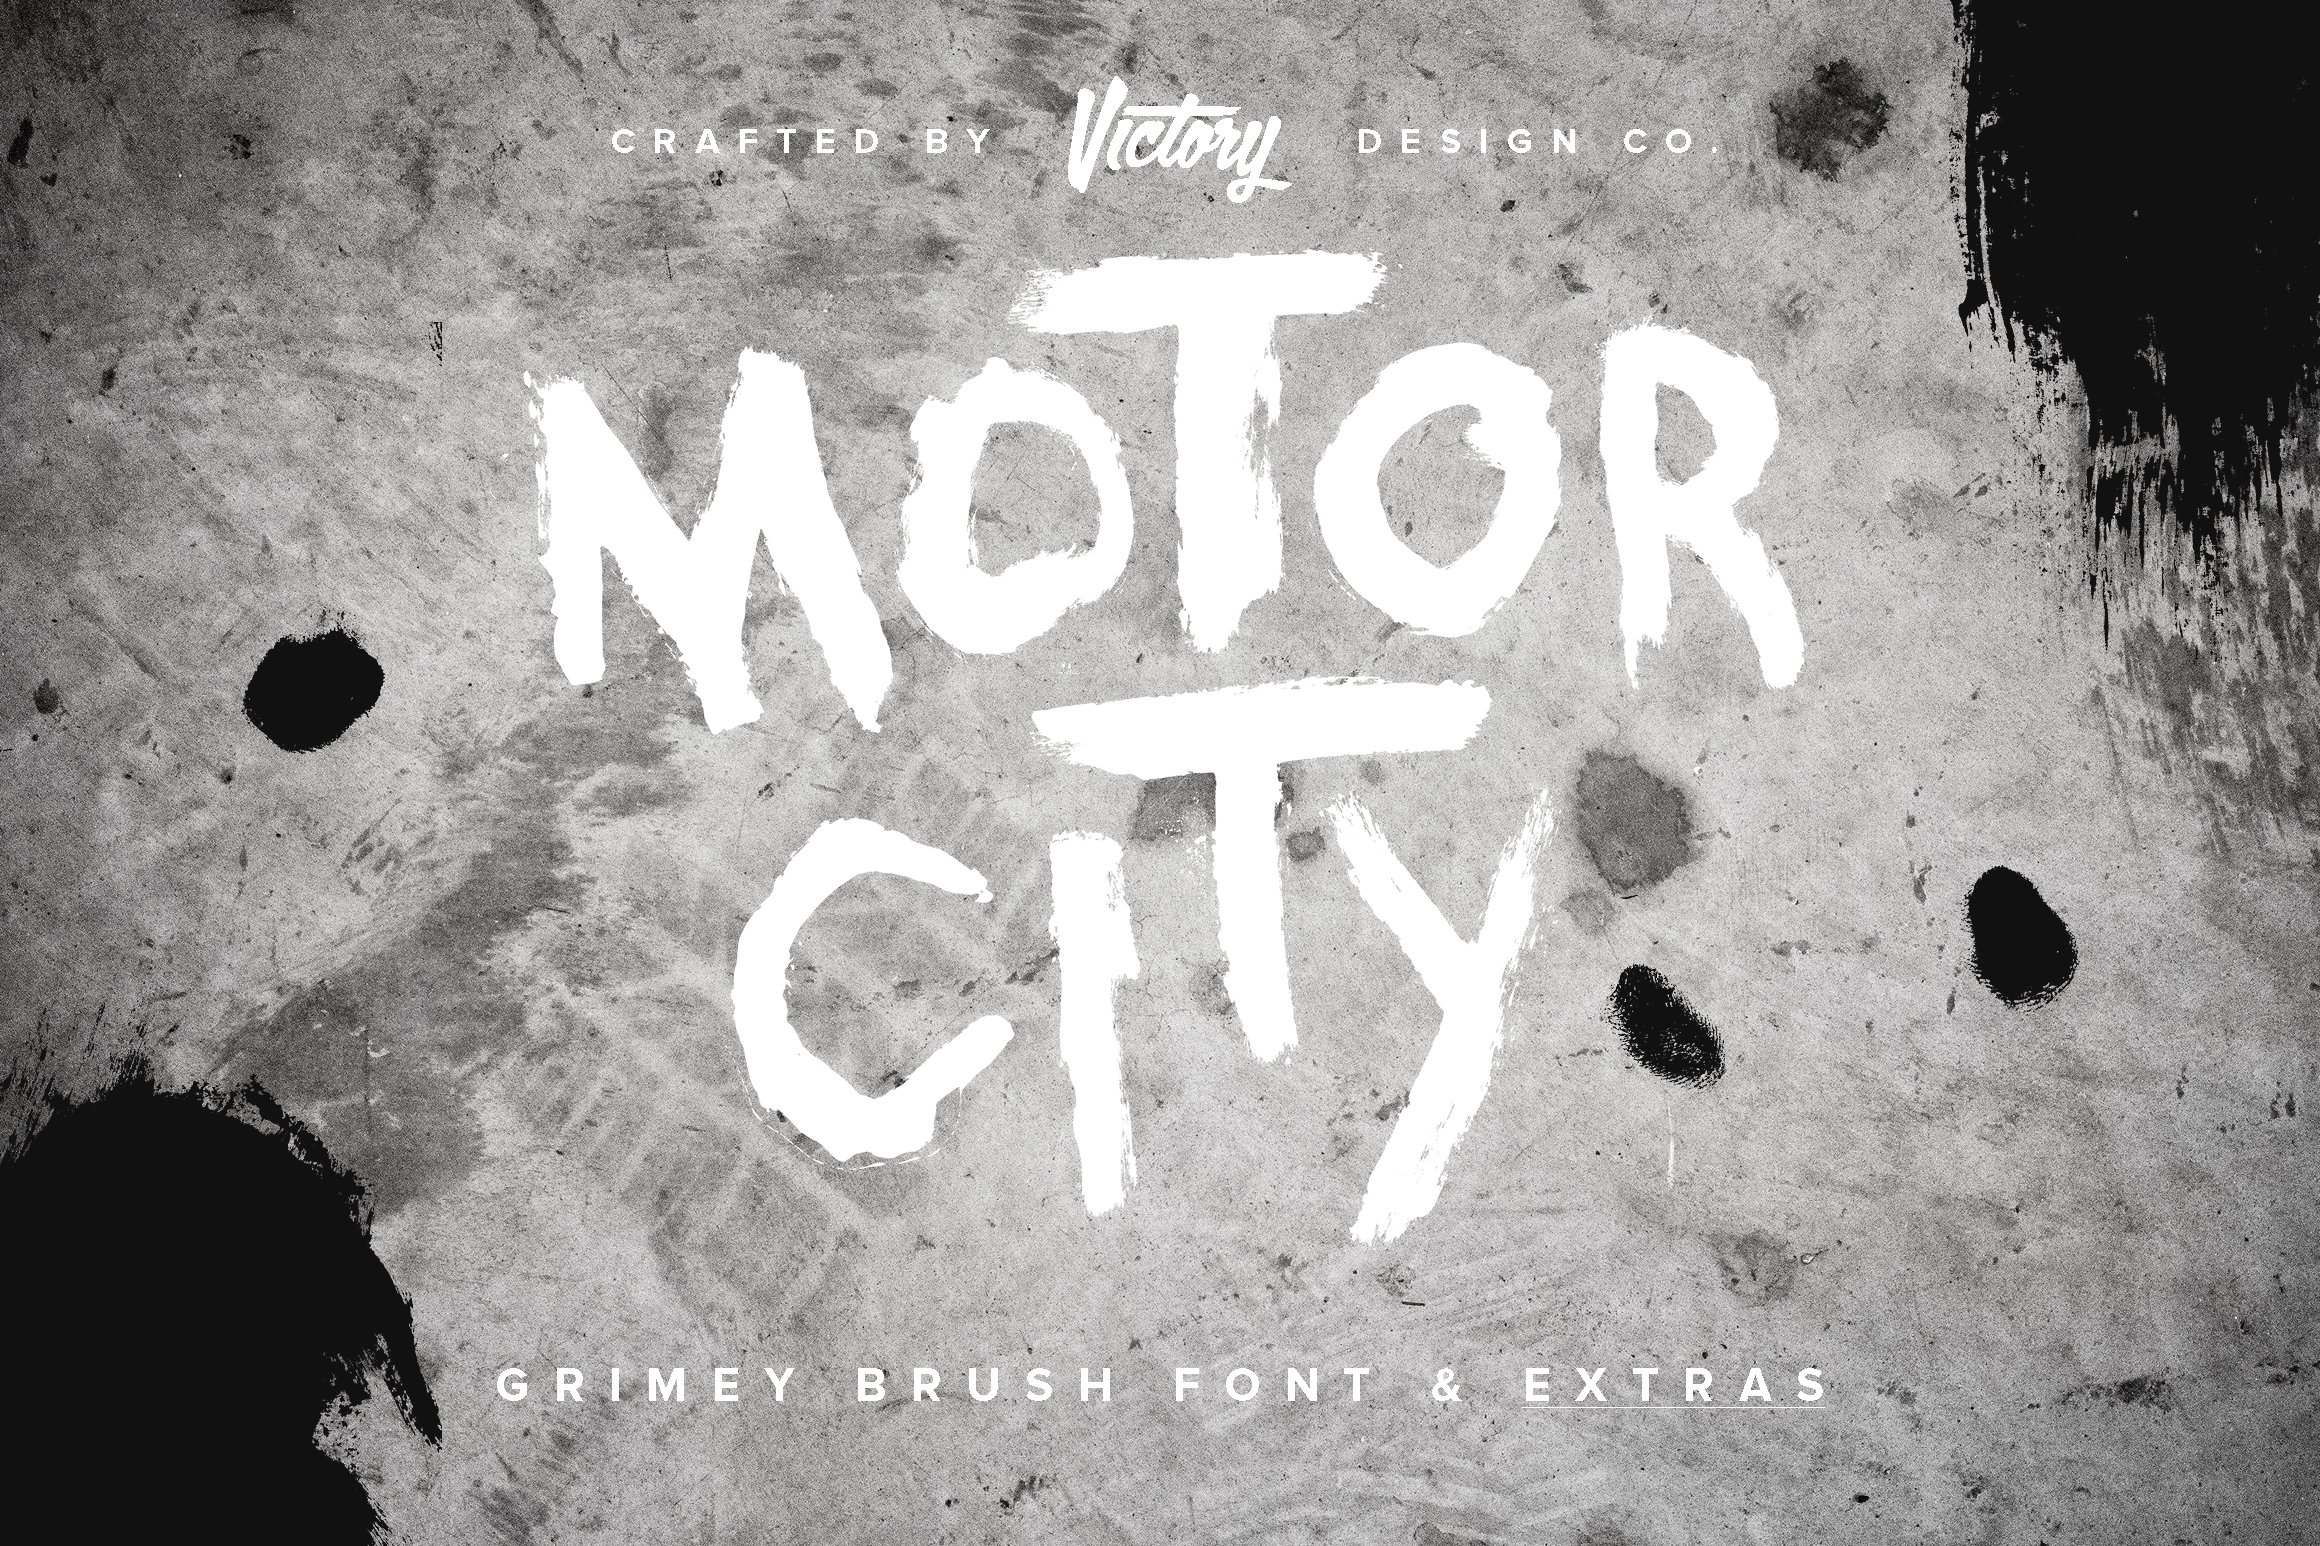 Grunge Font Hand Painted Motor City cover image.